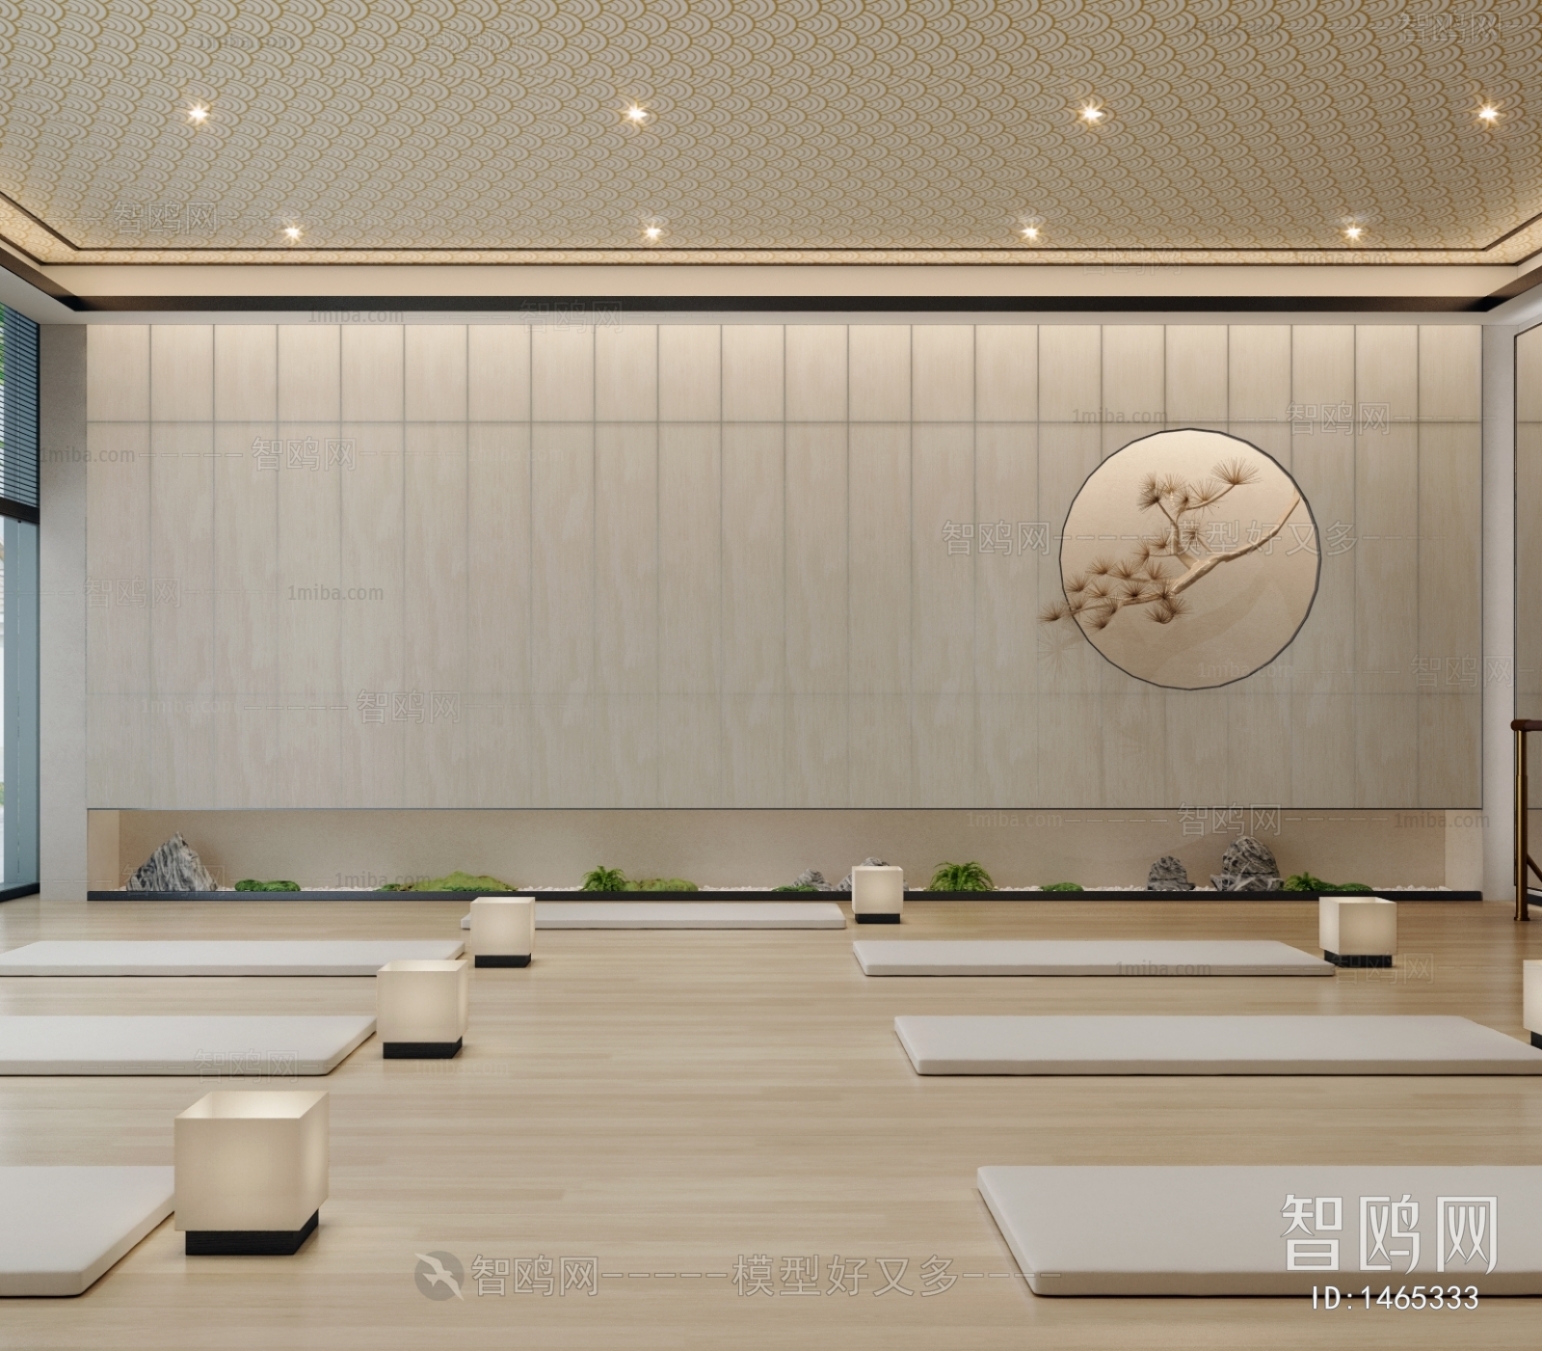 New Chinese Style Yoga Room